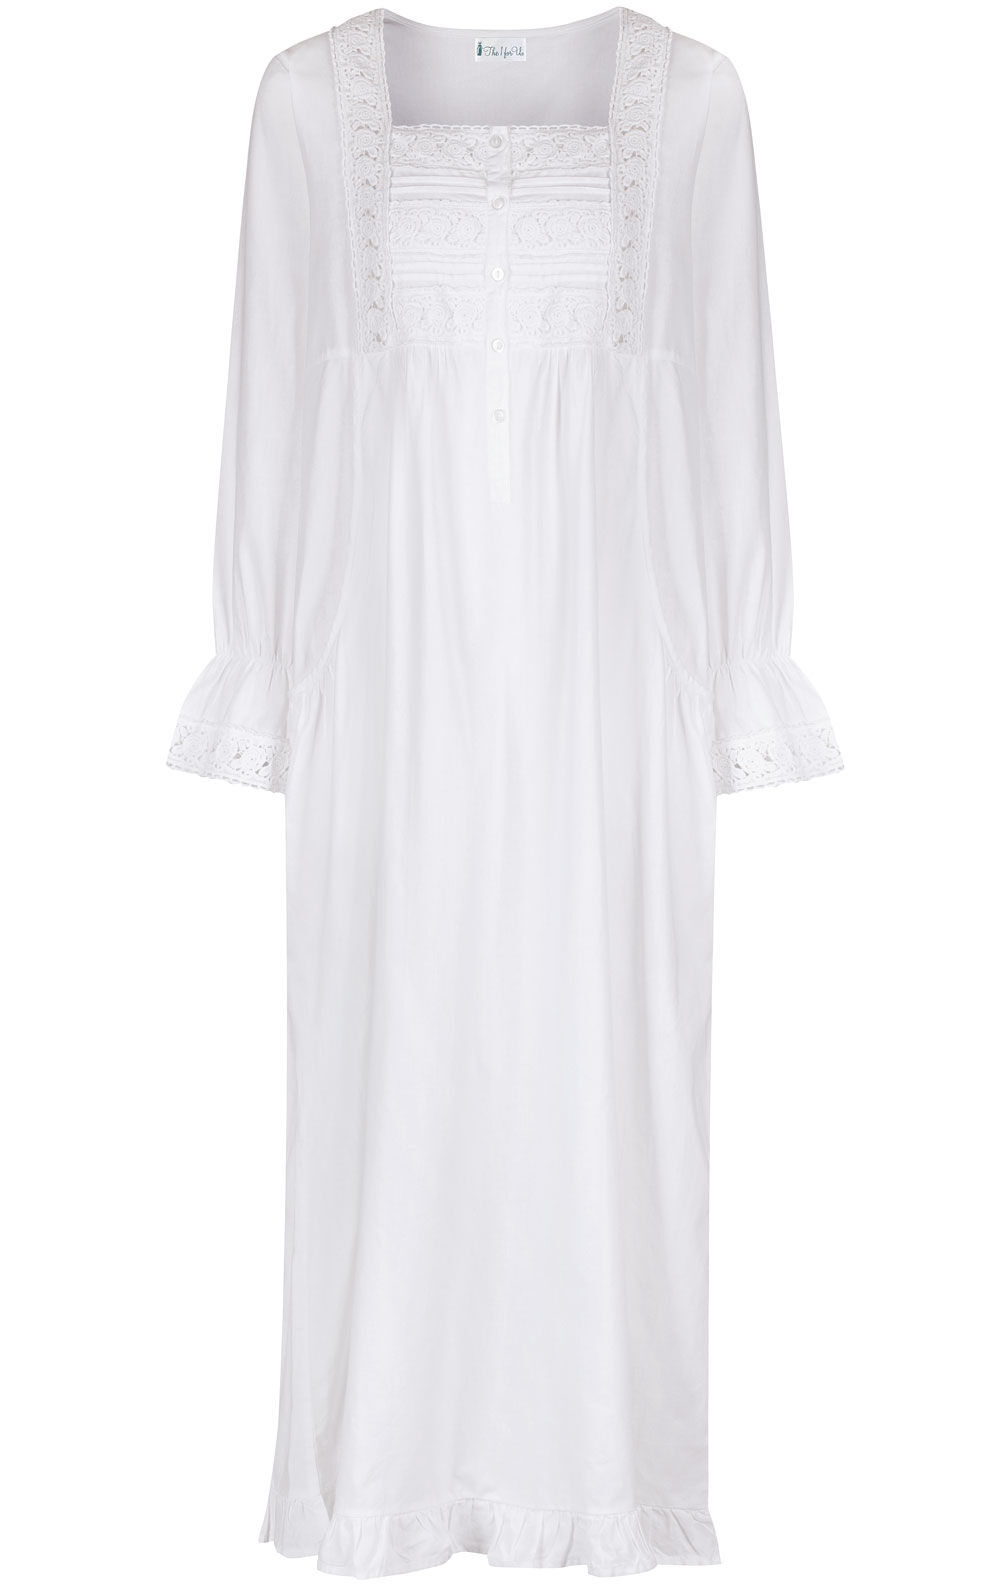 The 1 for U 100% Cotton Long Sleeve Nightdress with Pockets 7 Sizes Isabella